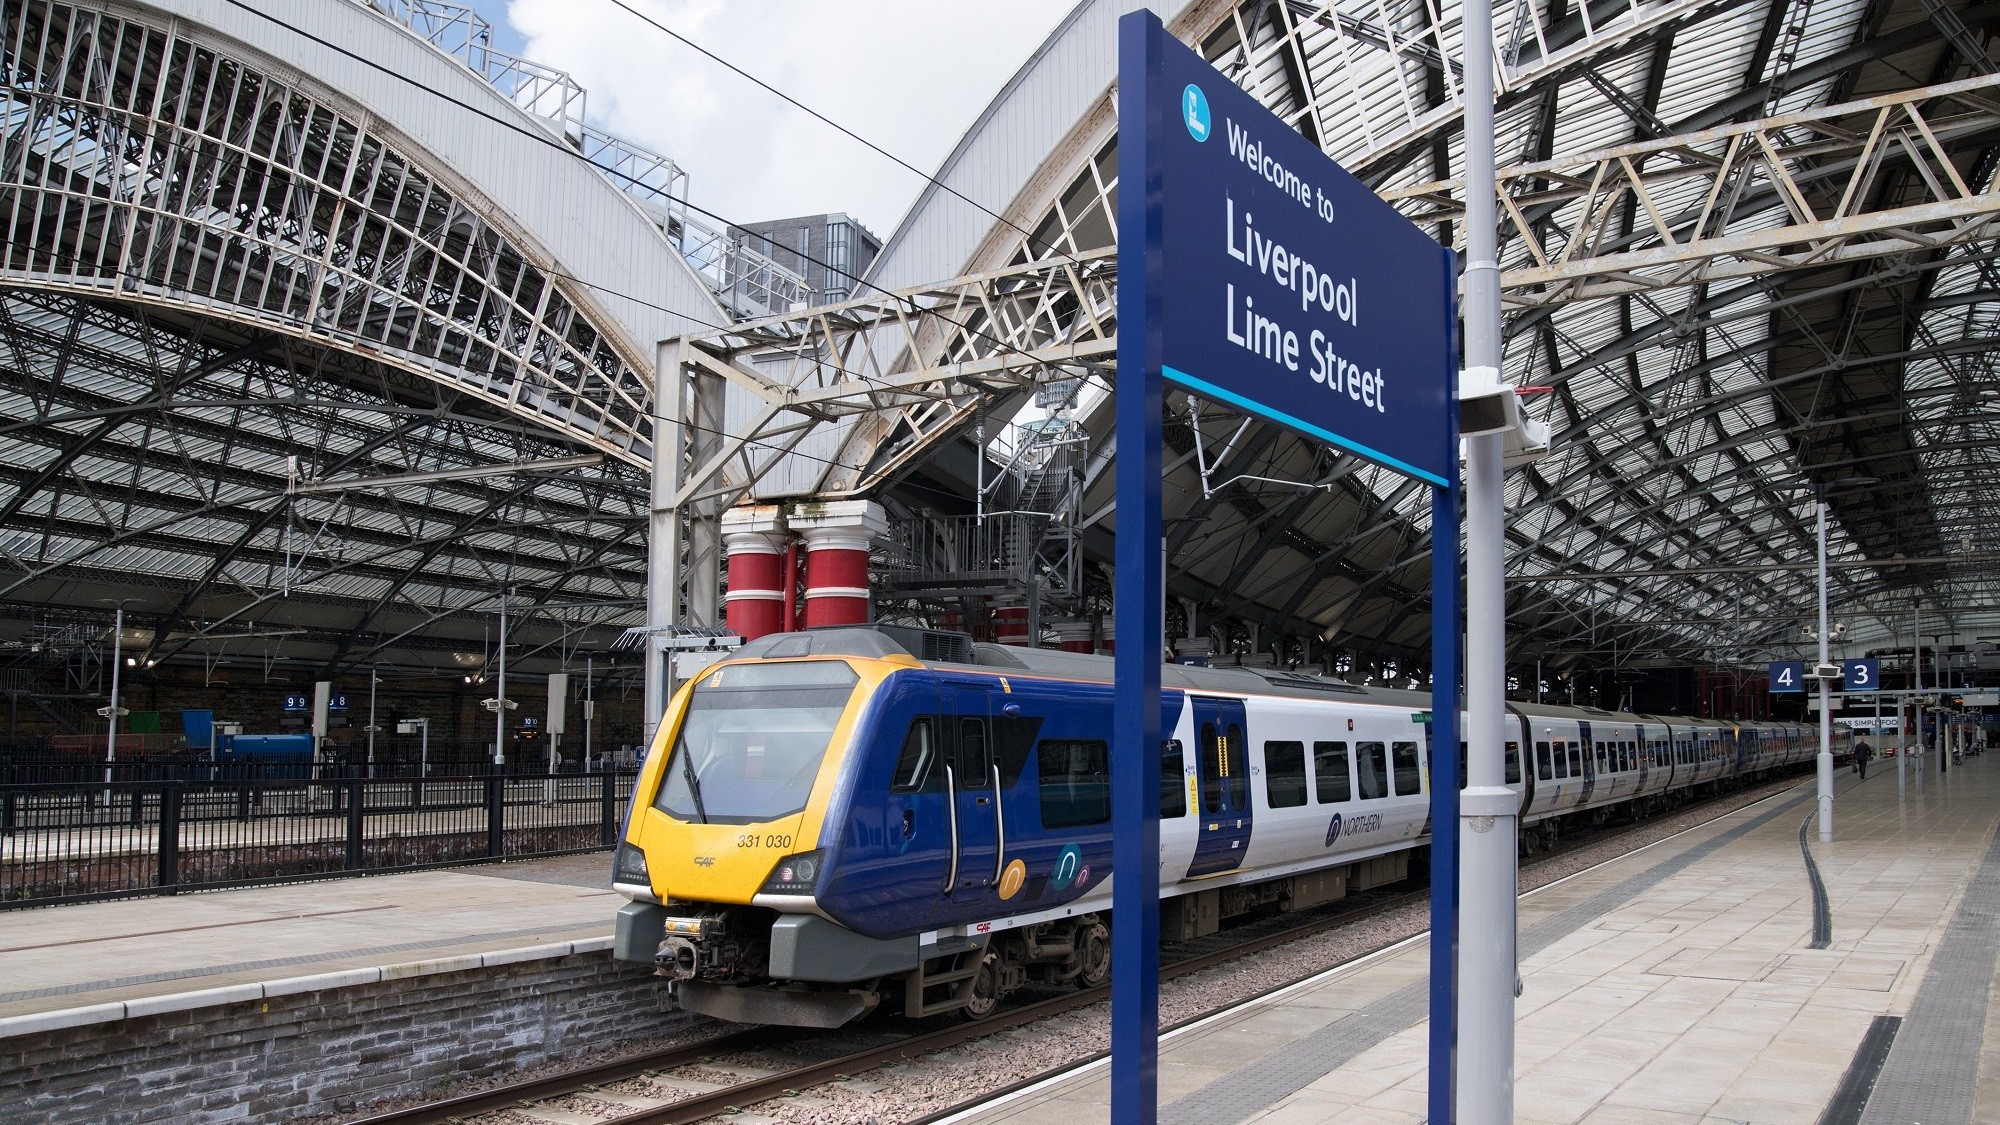 Image shows a Northern service at Liverpool Lime Street Station cropped